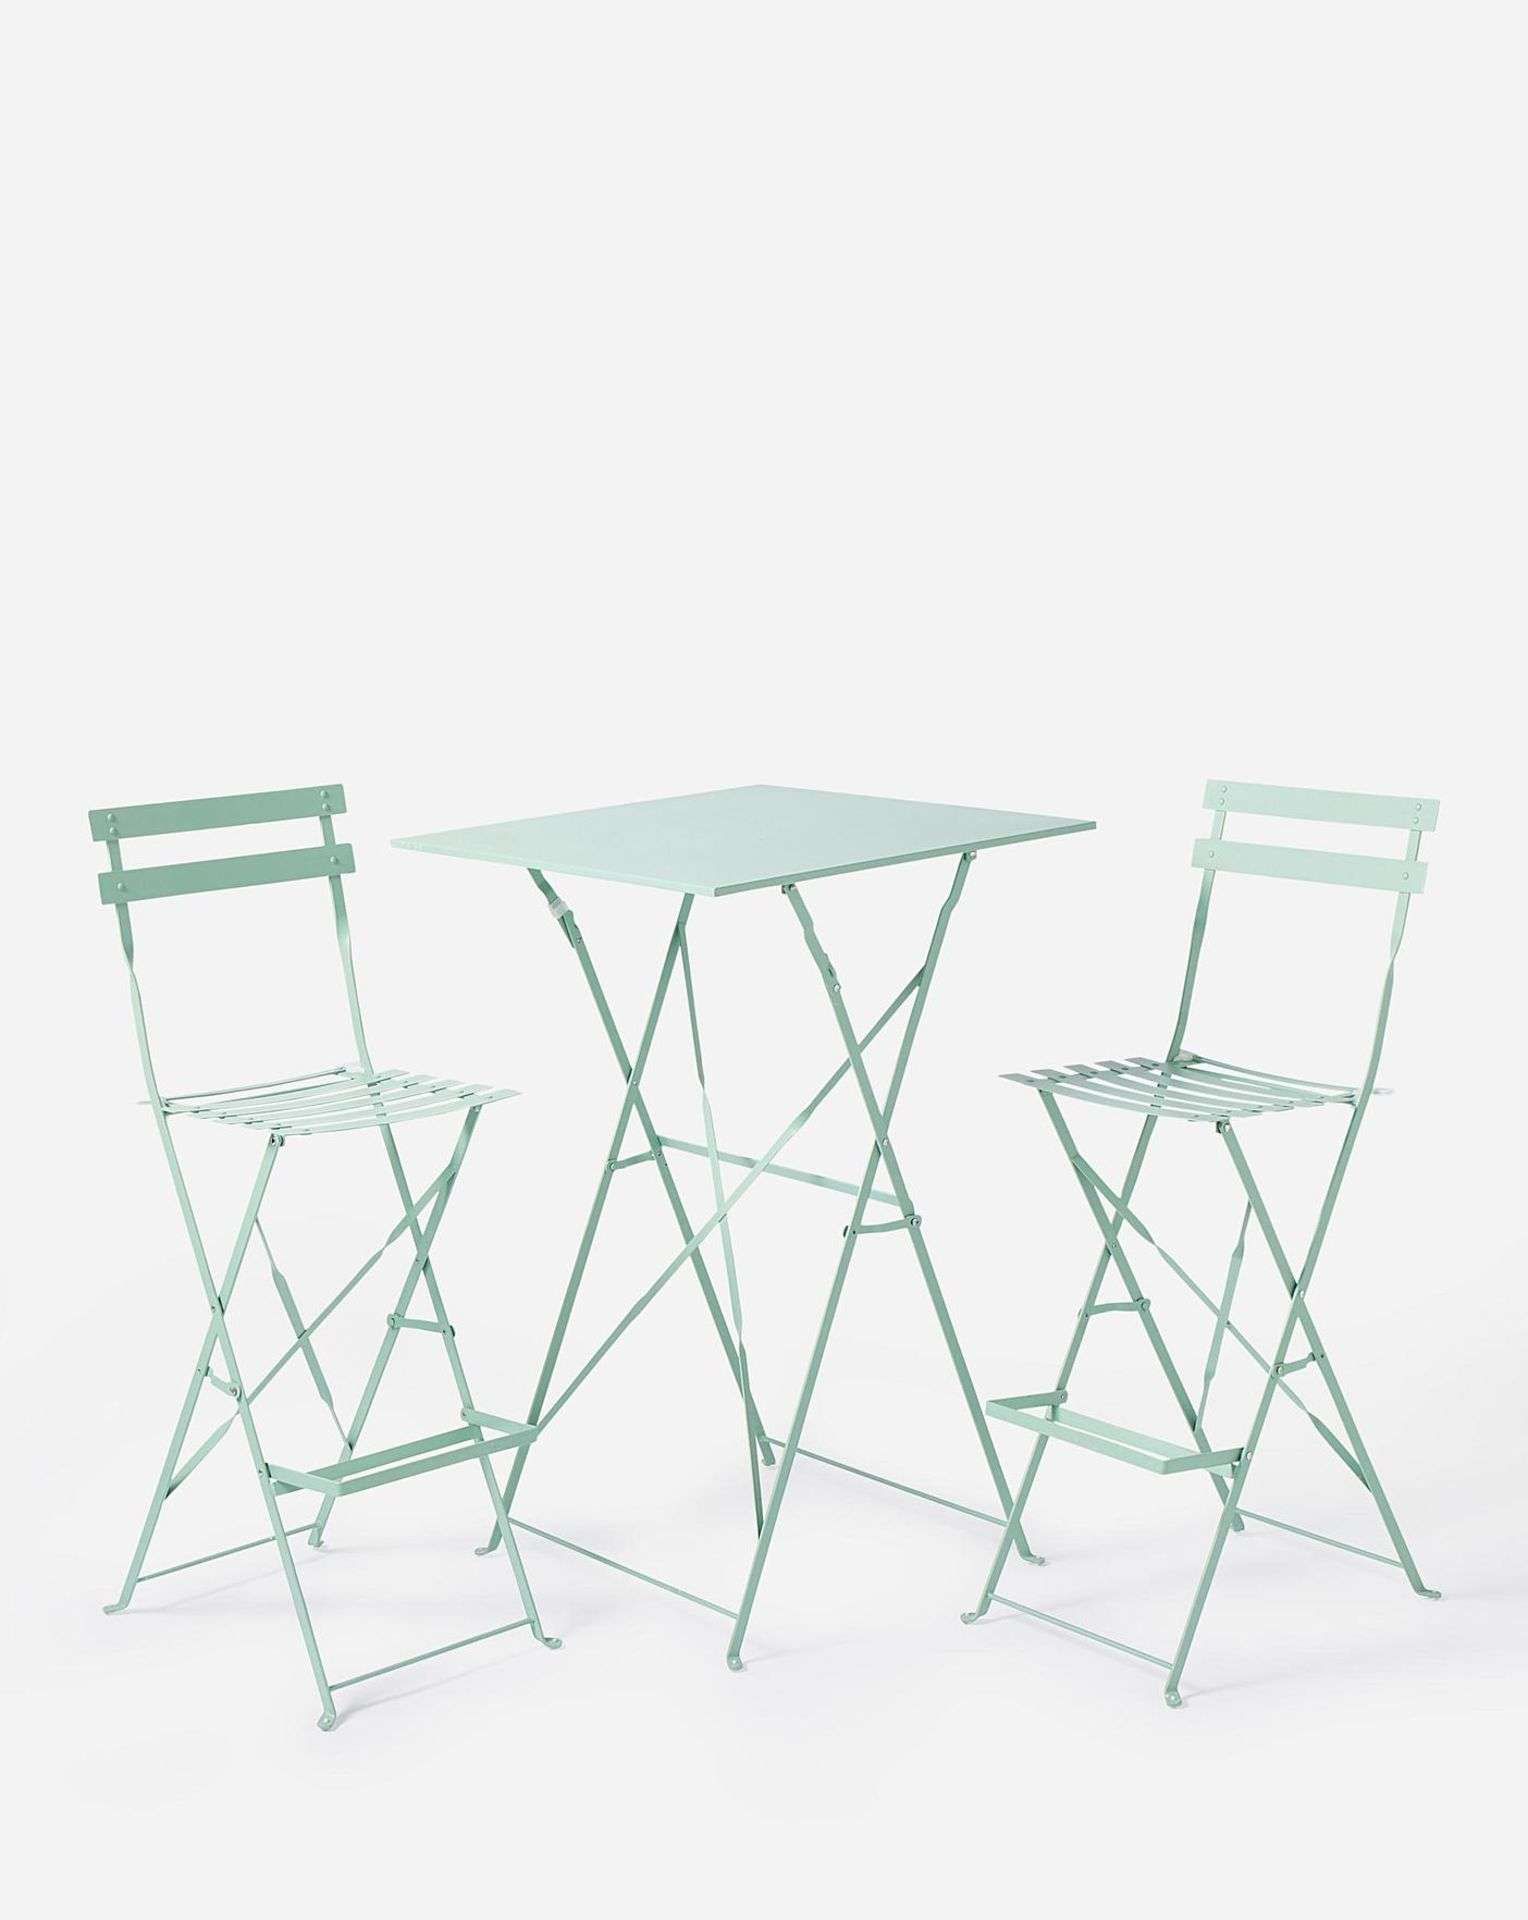 TRADE PALLET TO CONTAIN 6x BRAND NEW Palma Bistro Bar Set GREEN. RRP £159 EACH. Liven up your - Bild 2 aus 3